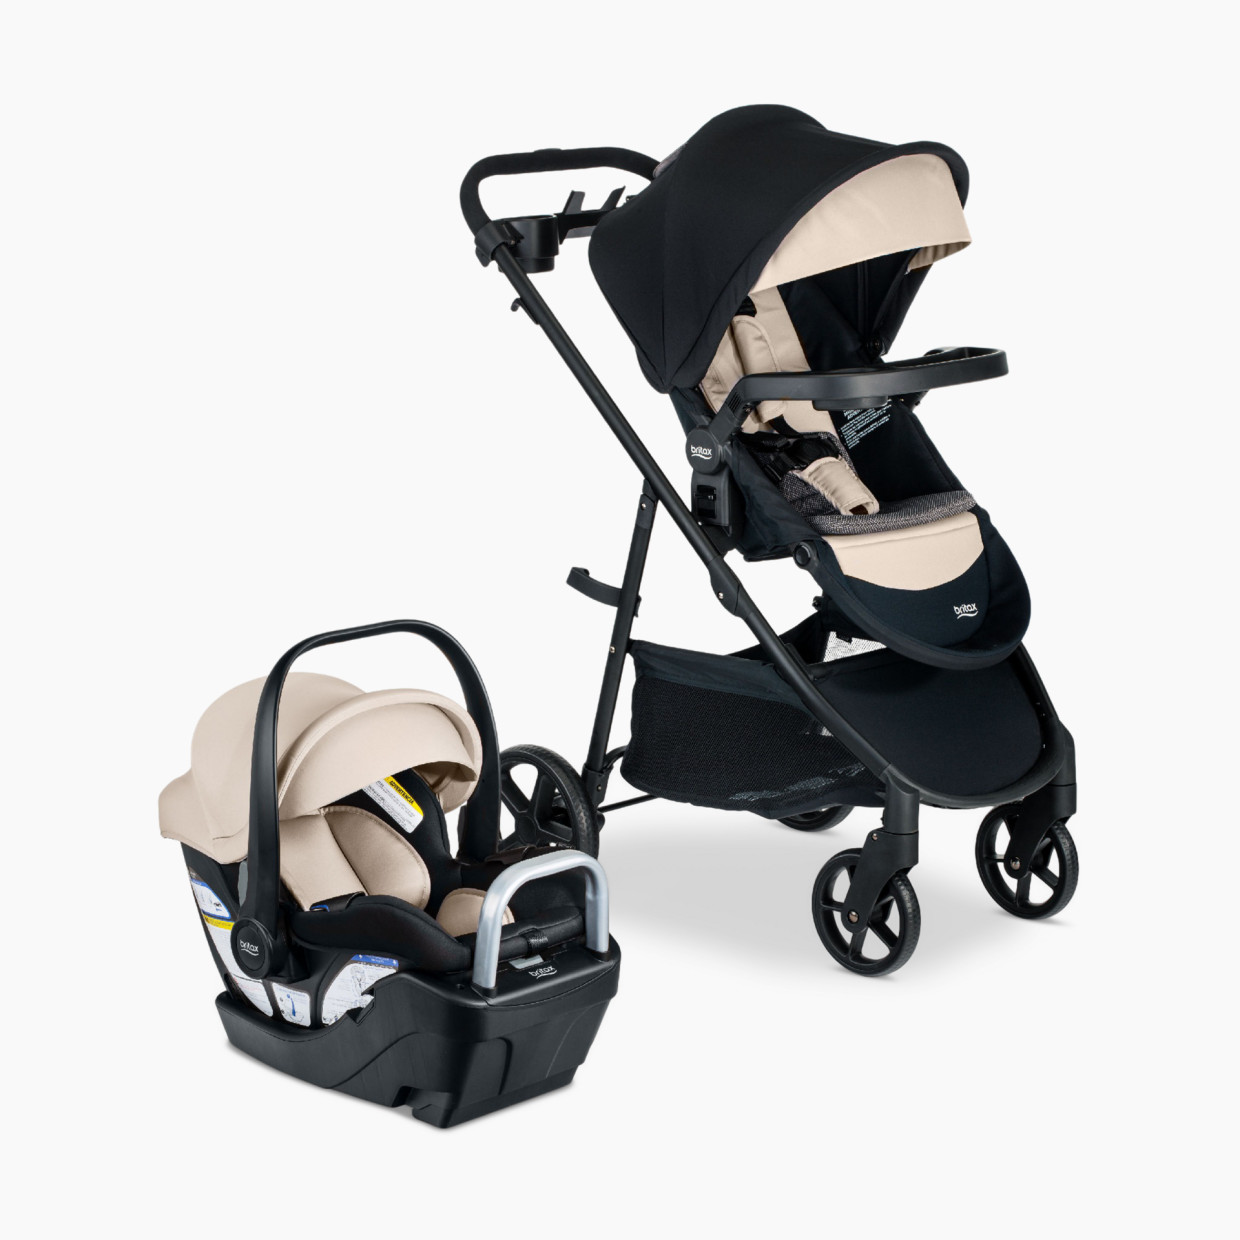 Britax Willow Brook S+ Travel System - Sand Onyx.